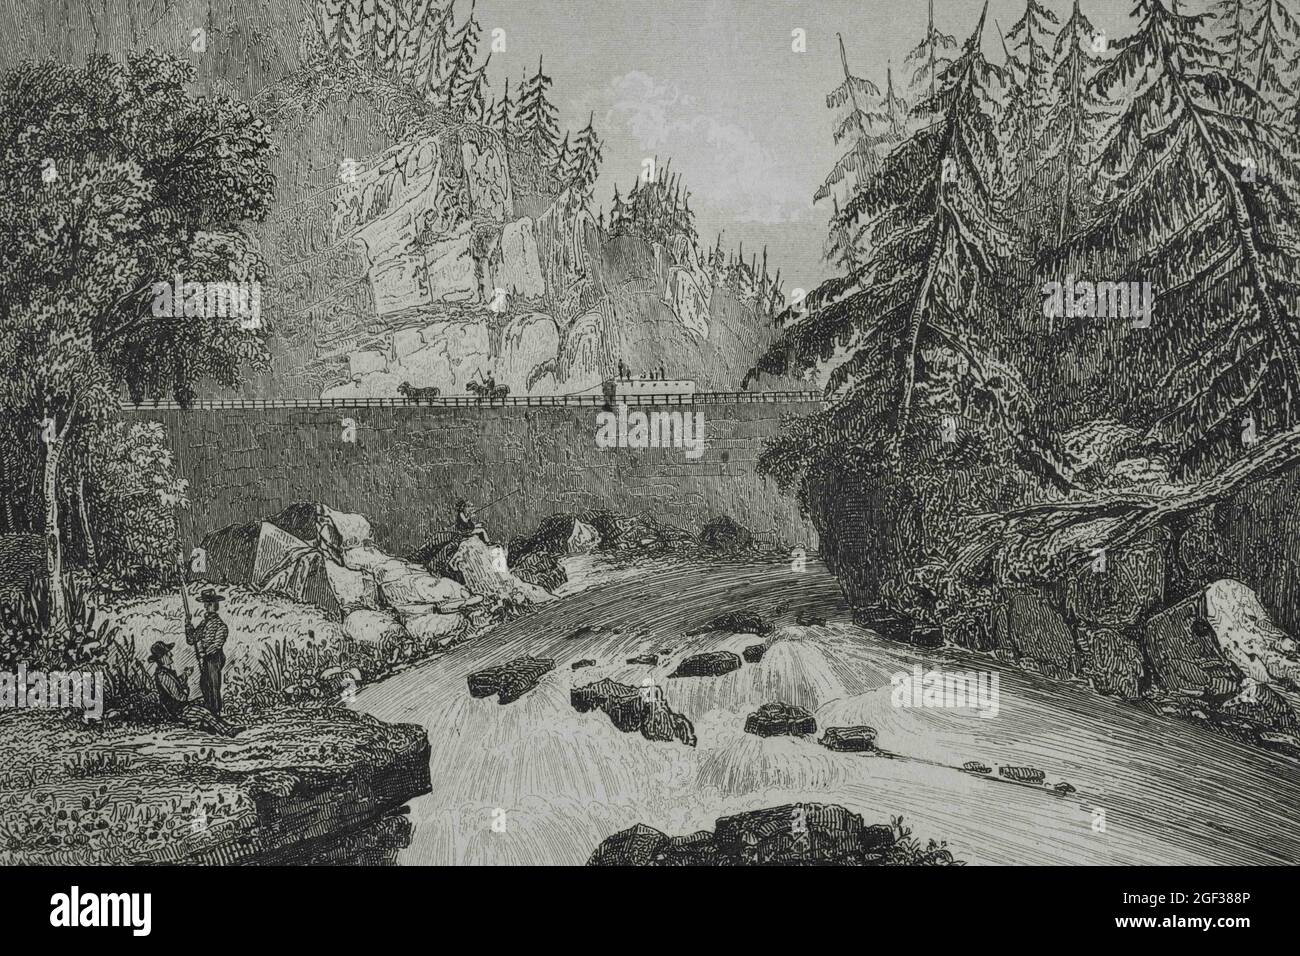 United States, New York State. Little Falls. Mohawk River valley rapids and rocks. A canal was constructed around the rapids about 1795. Engraving by Stock Photo